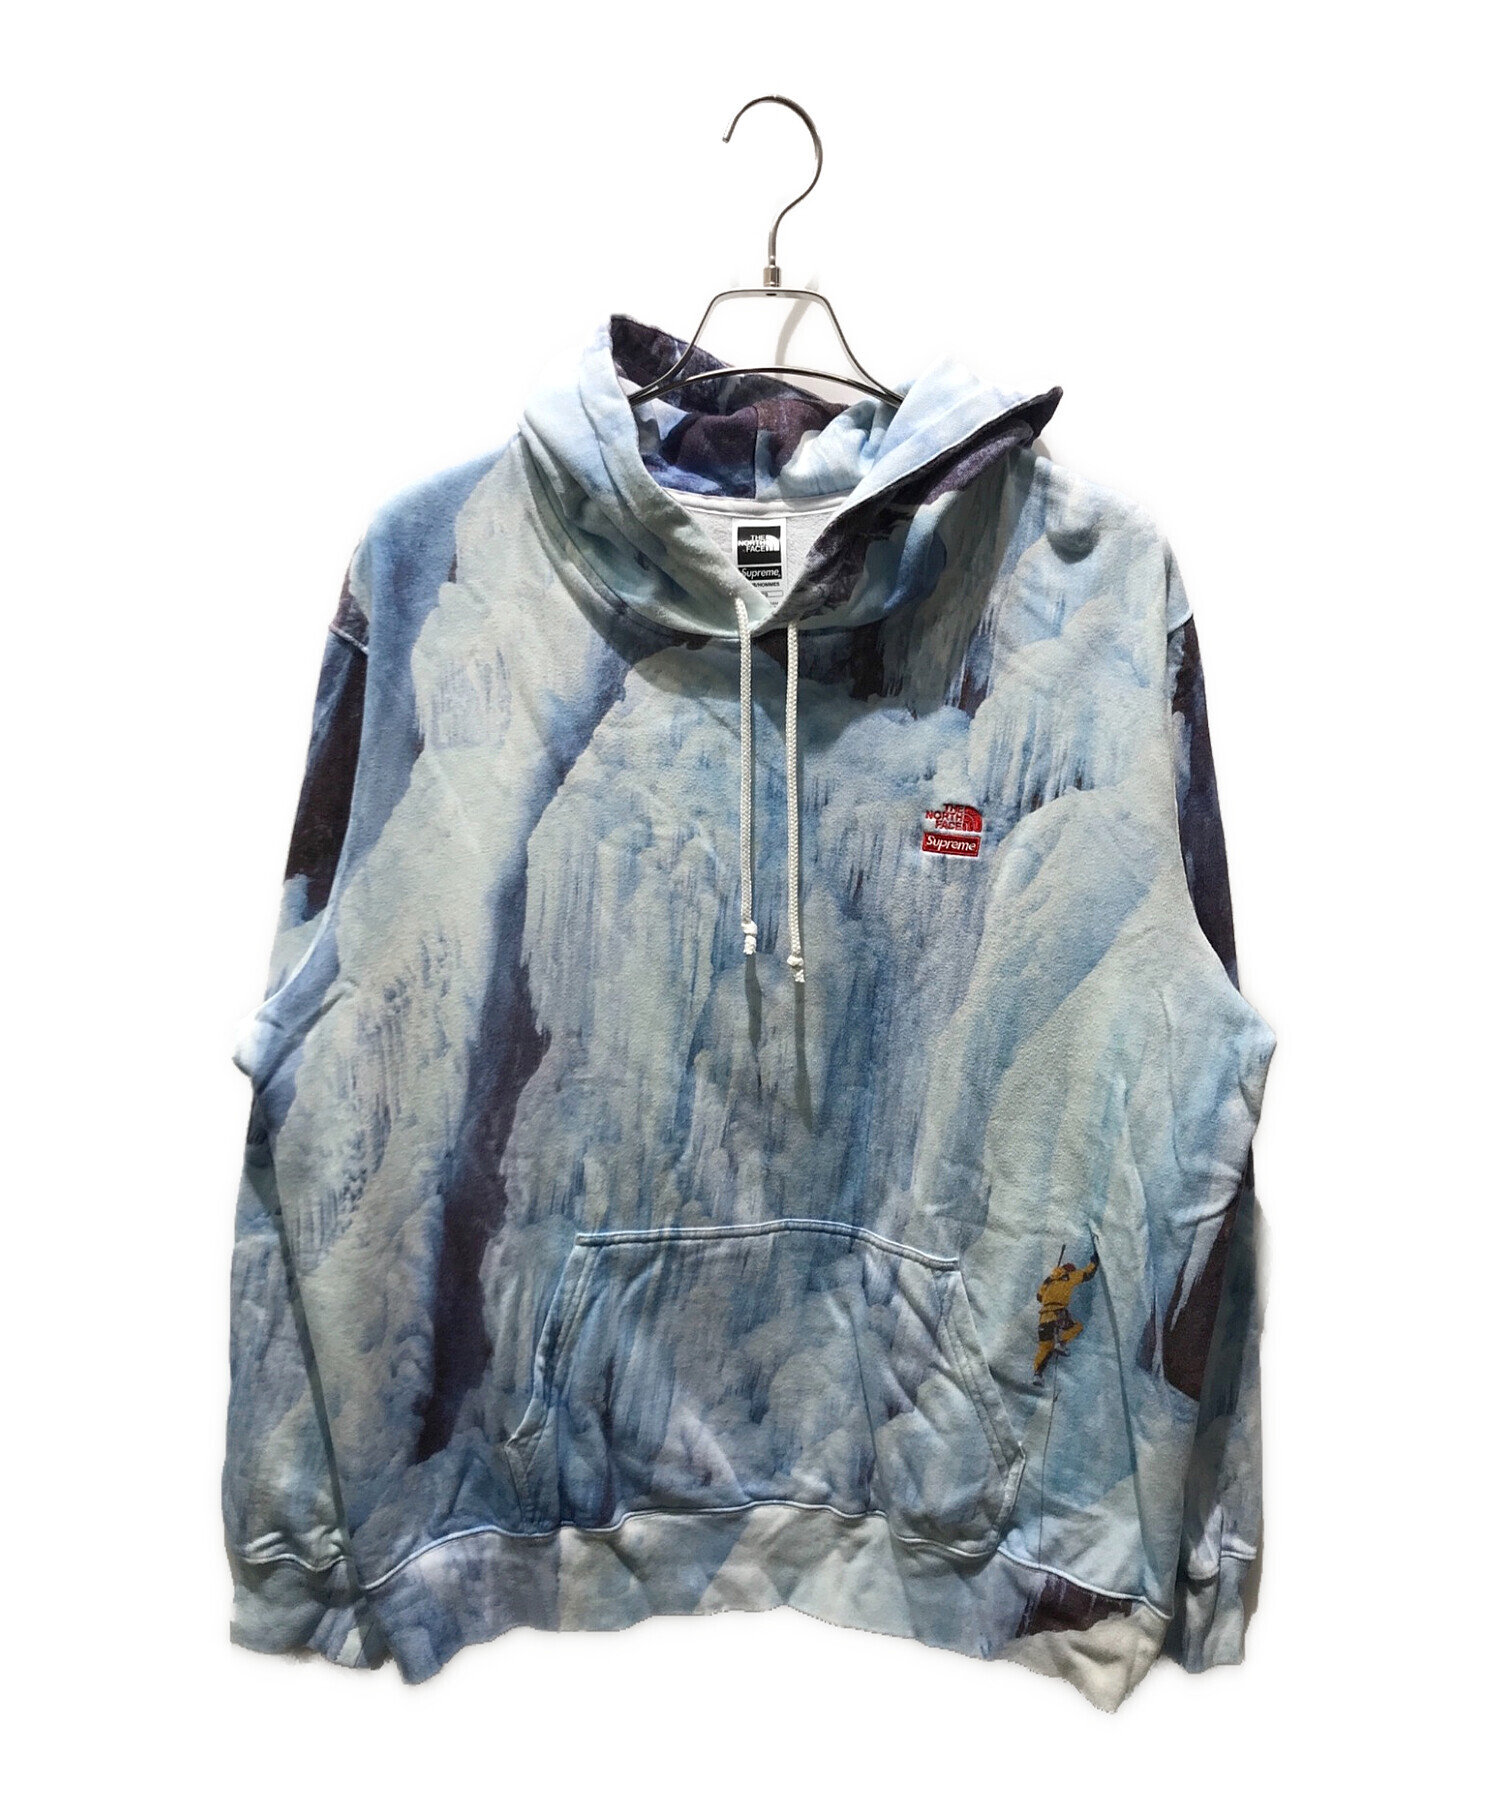 Supreme The north face Hooded XL teal